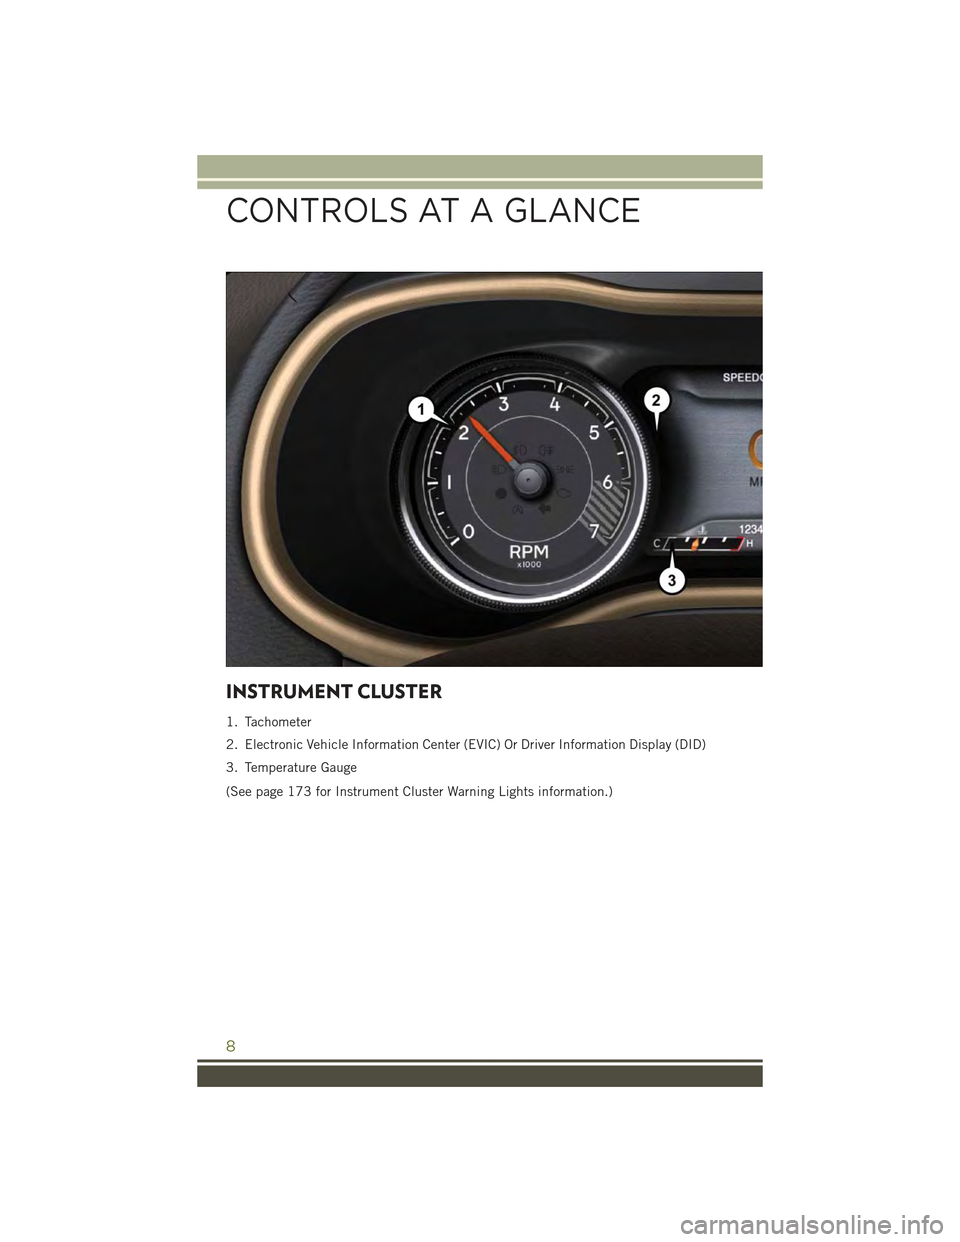 JEEP CHEROKEE 2015 KL / 5.G User Guide INSTRUMENT CLUSTER
1. Tachometer
2. Electronic Vehicle Information Center (EVIC) Or Driver Information Display (DID)
3. Temperature Gauge
(See page 173 for Instrument Cluster Warning Lights informatio